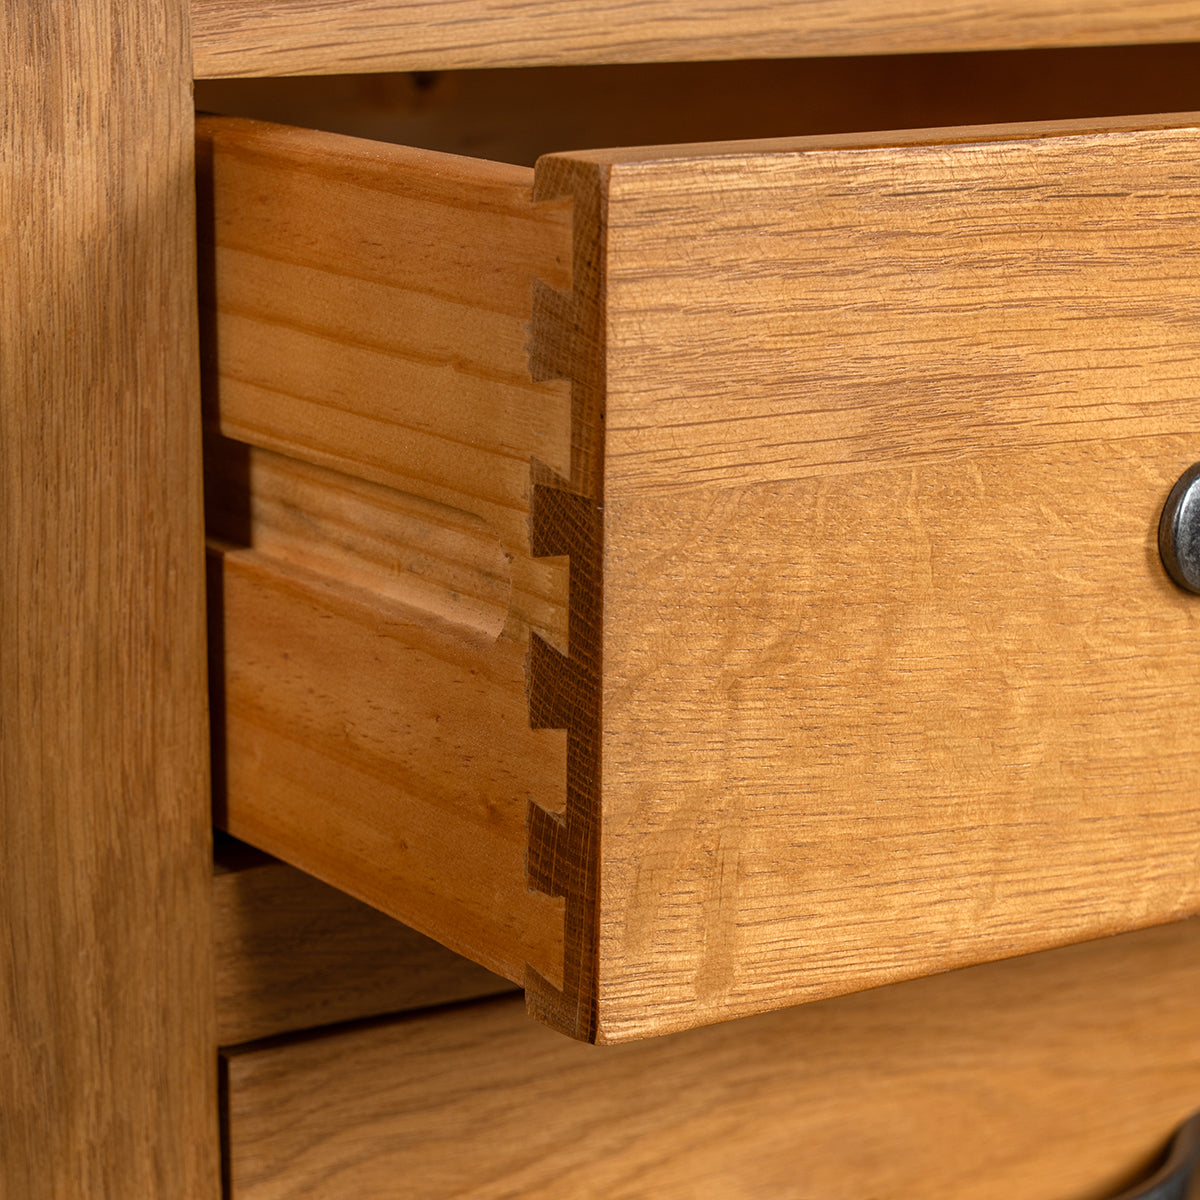 a close up of a wooden dresser in a room 